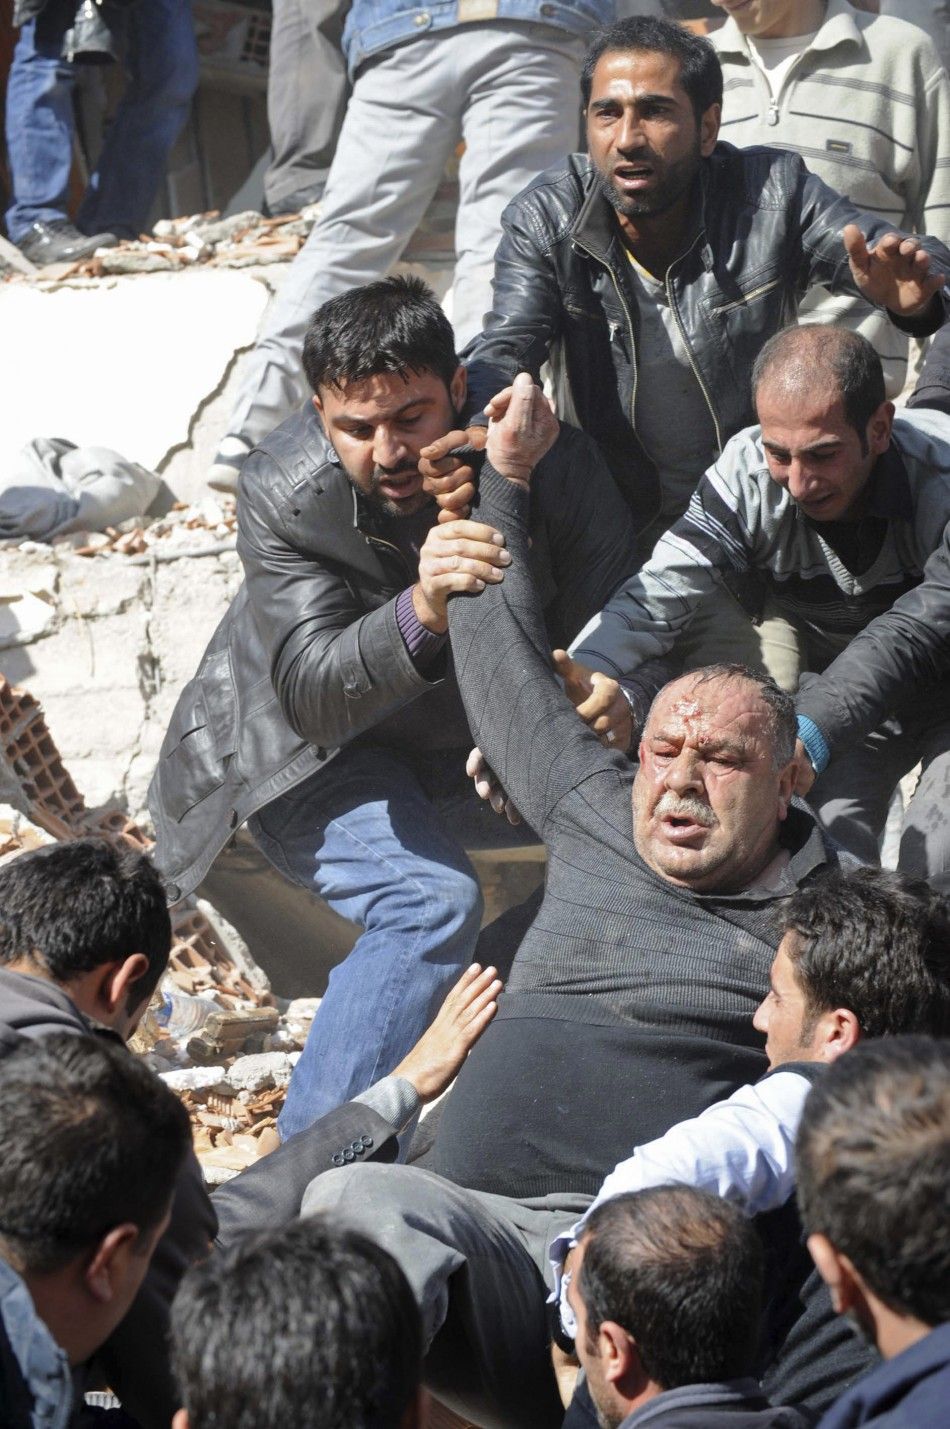 Turkey Earthquake 2011 More than 200 Dead and About 350 Injured in 7.2 Magnitude Quake 